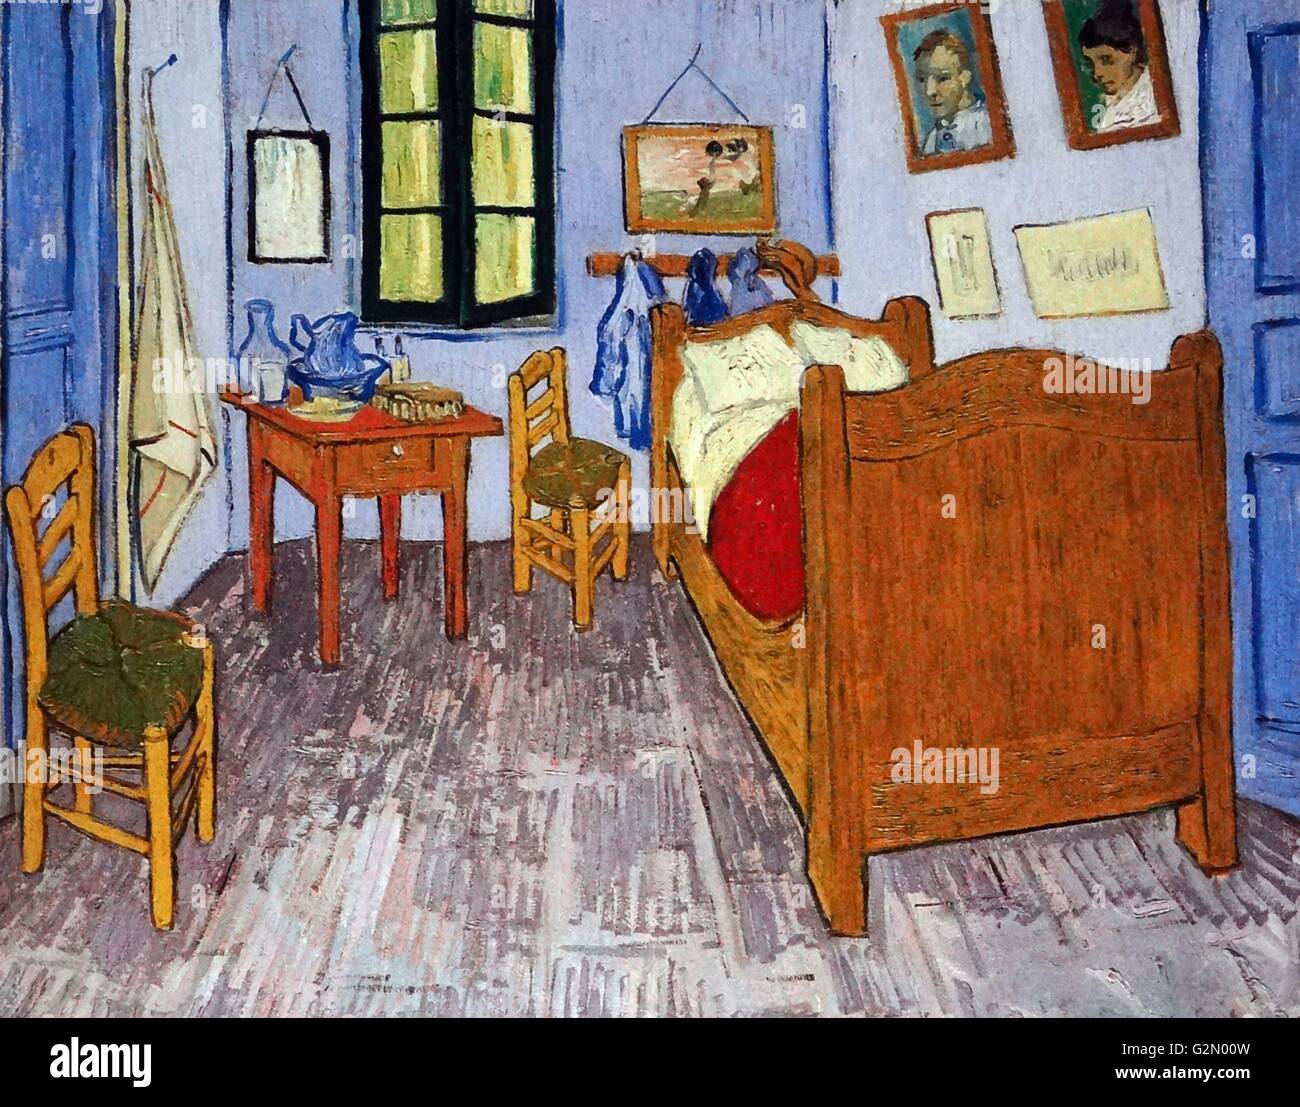 Painting by the famous Dutch artist Vincent Van Gogh (30th March 1853 - 29th July 1890), work titled 'The bedroom'. Completed in 1889. Stock Photo